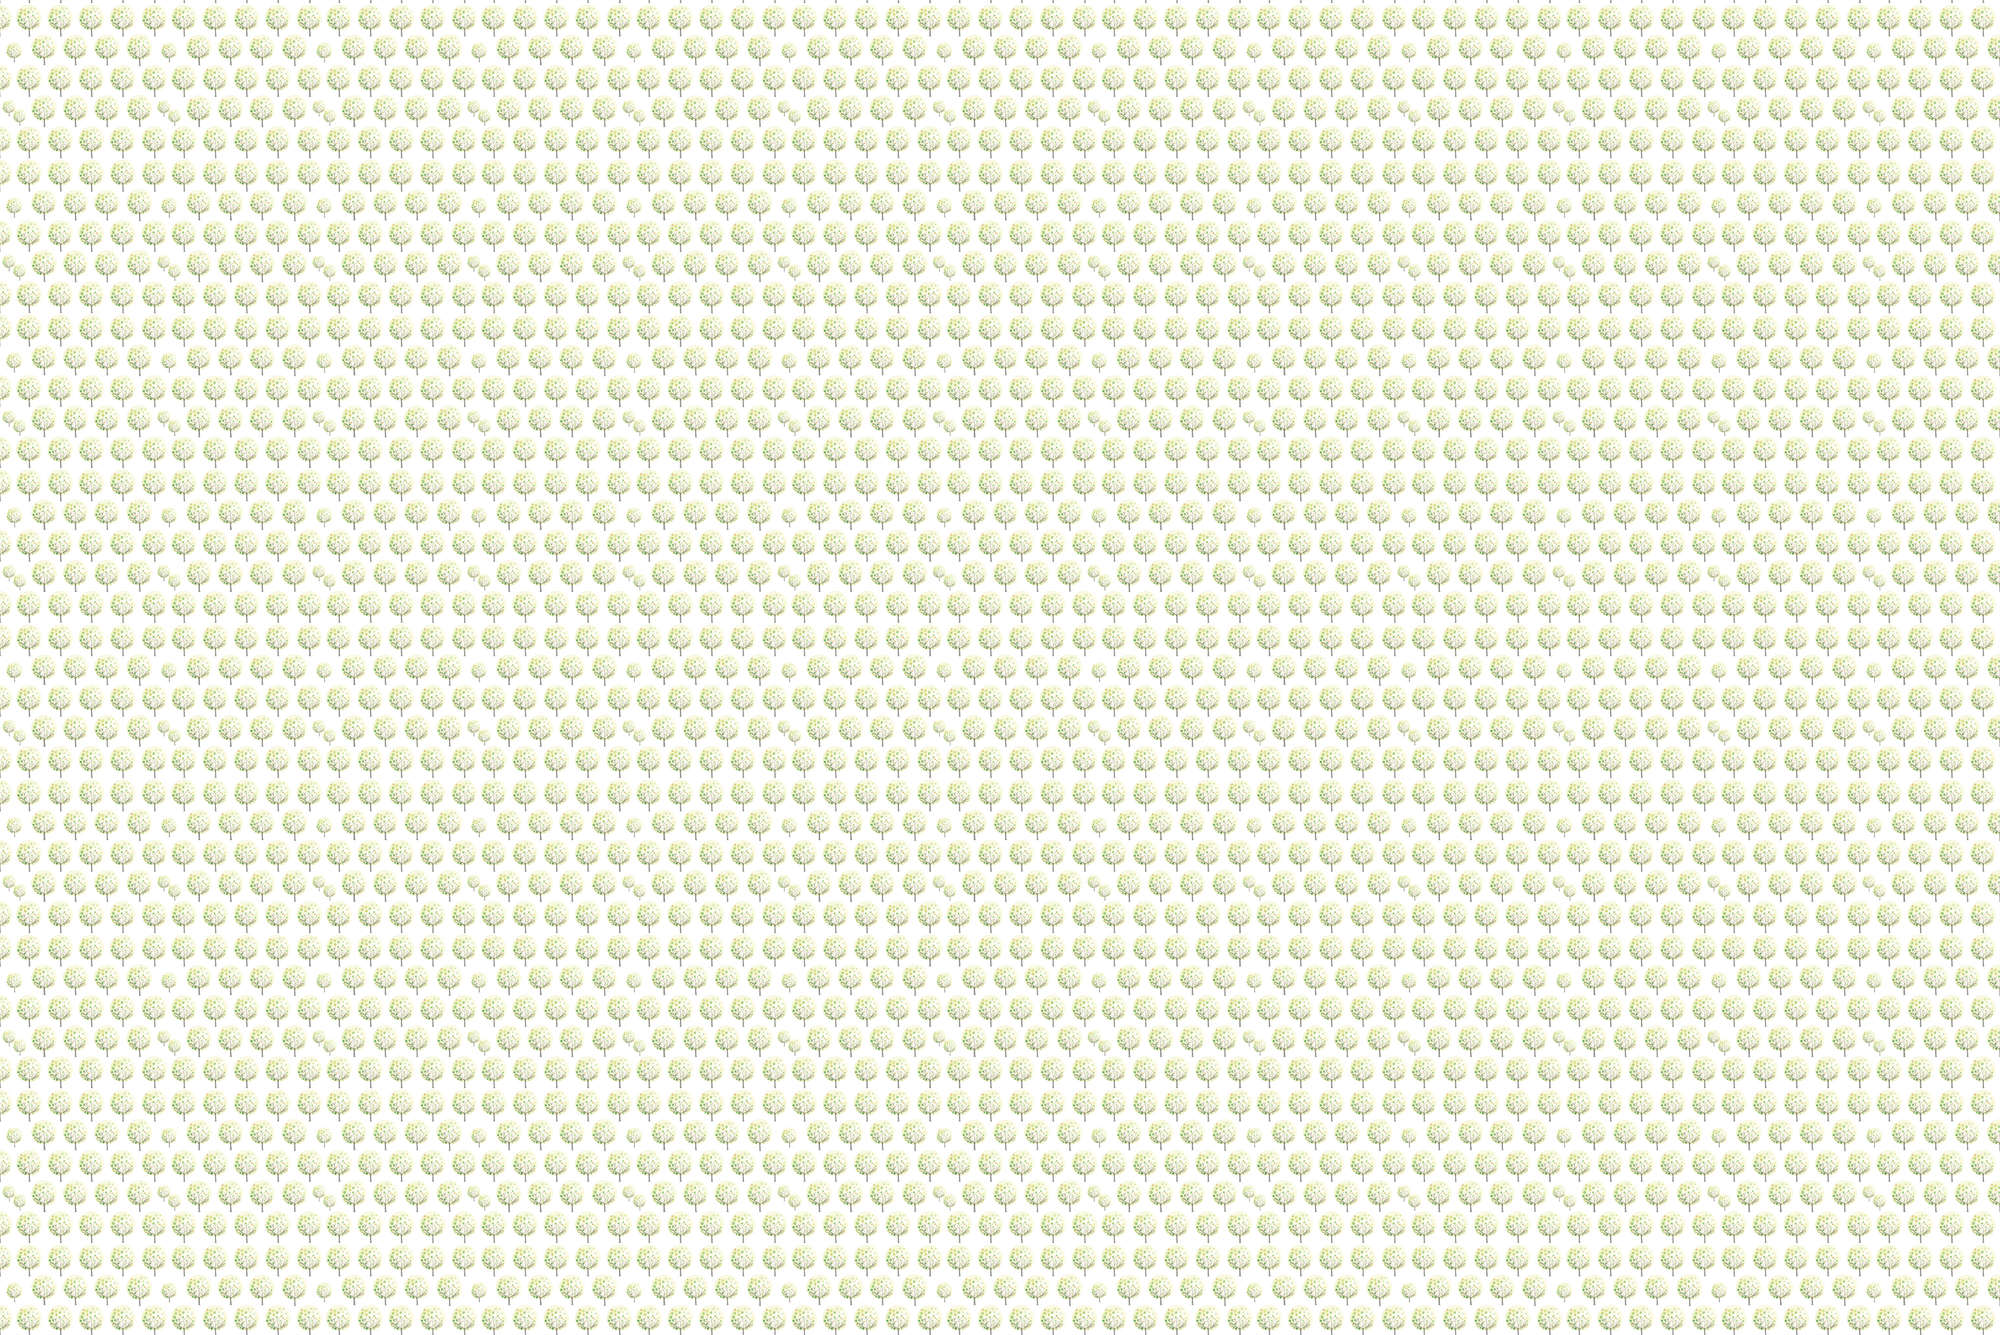             Design wall mural forest pattern in green on white background on mother of pearl smooth non-woven
        